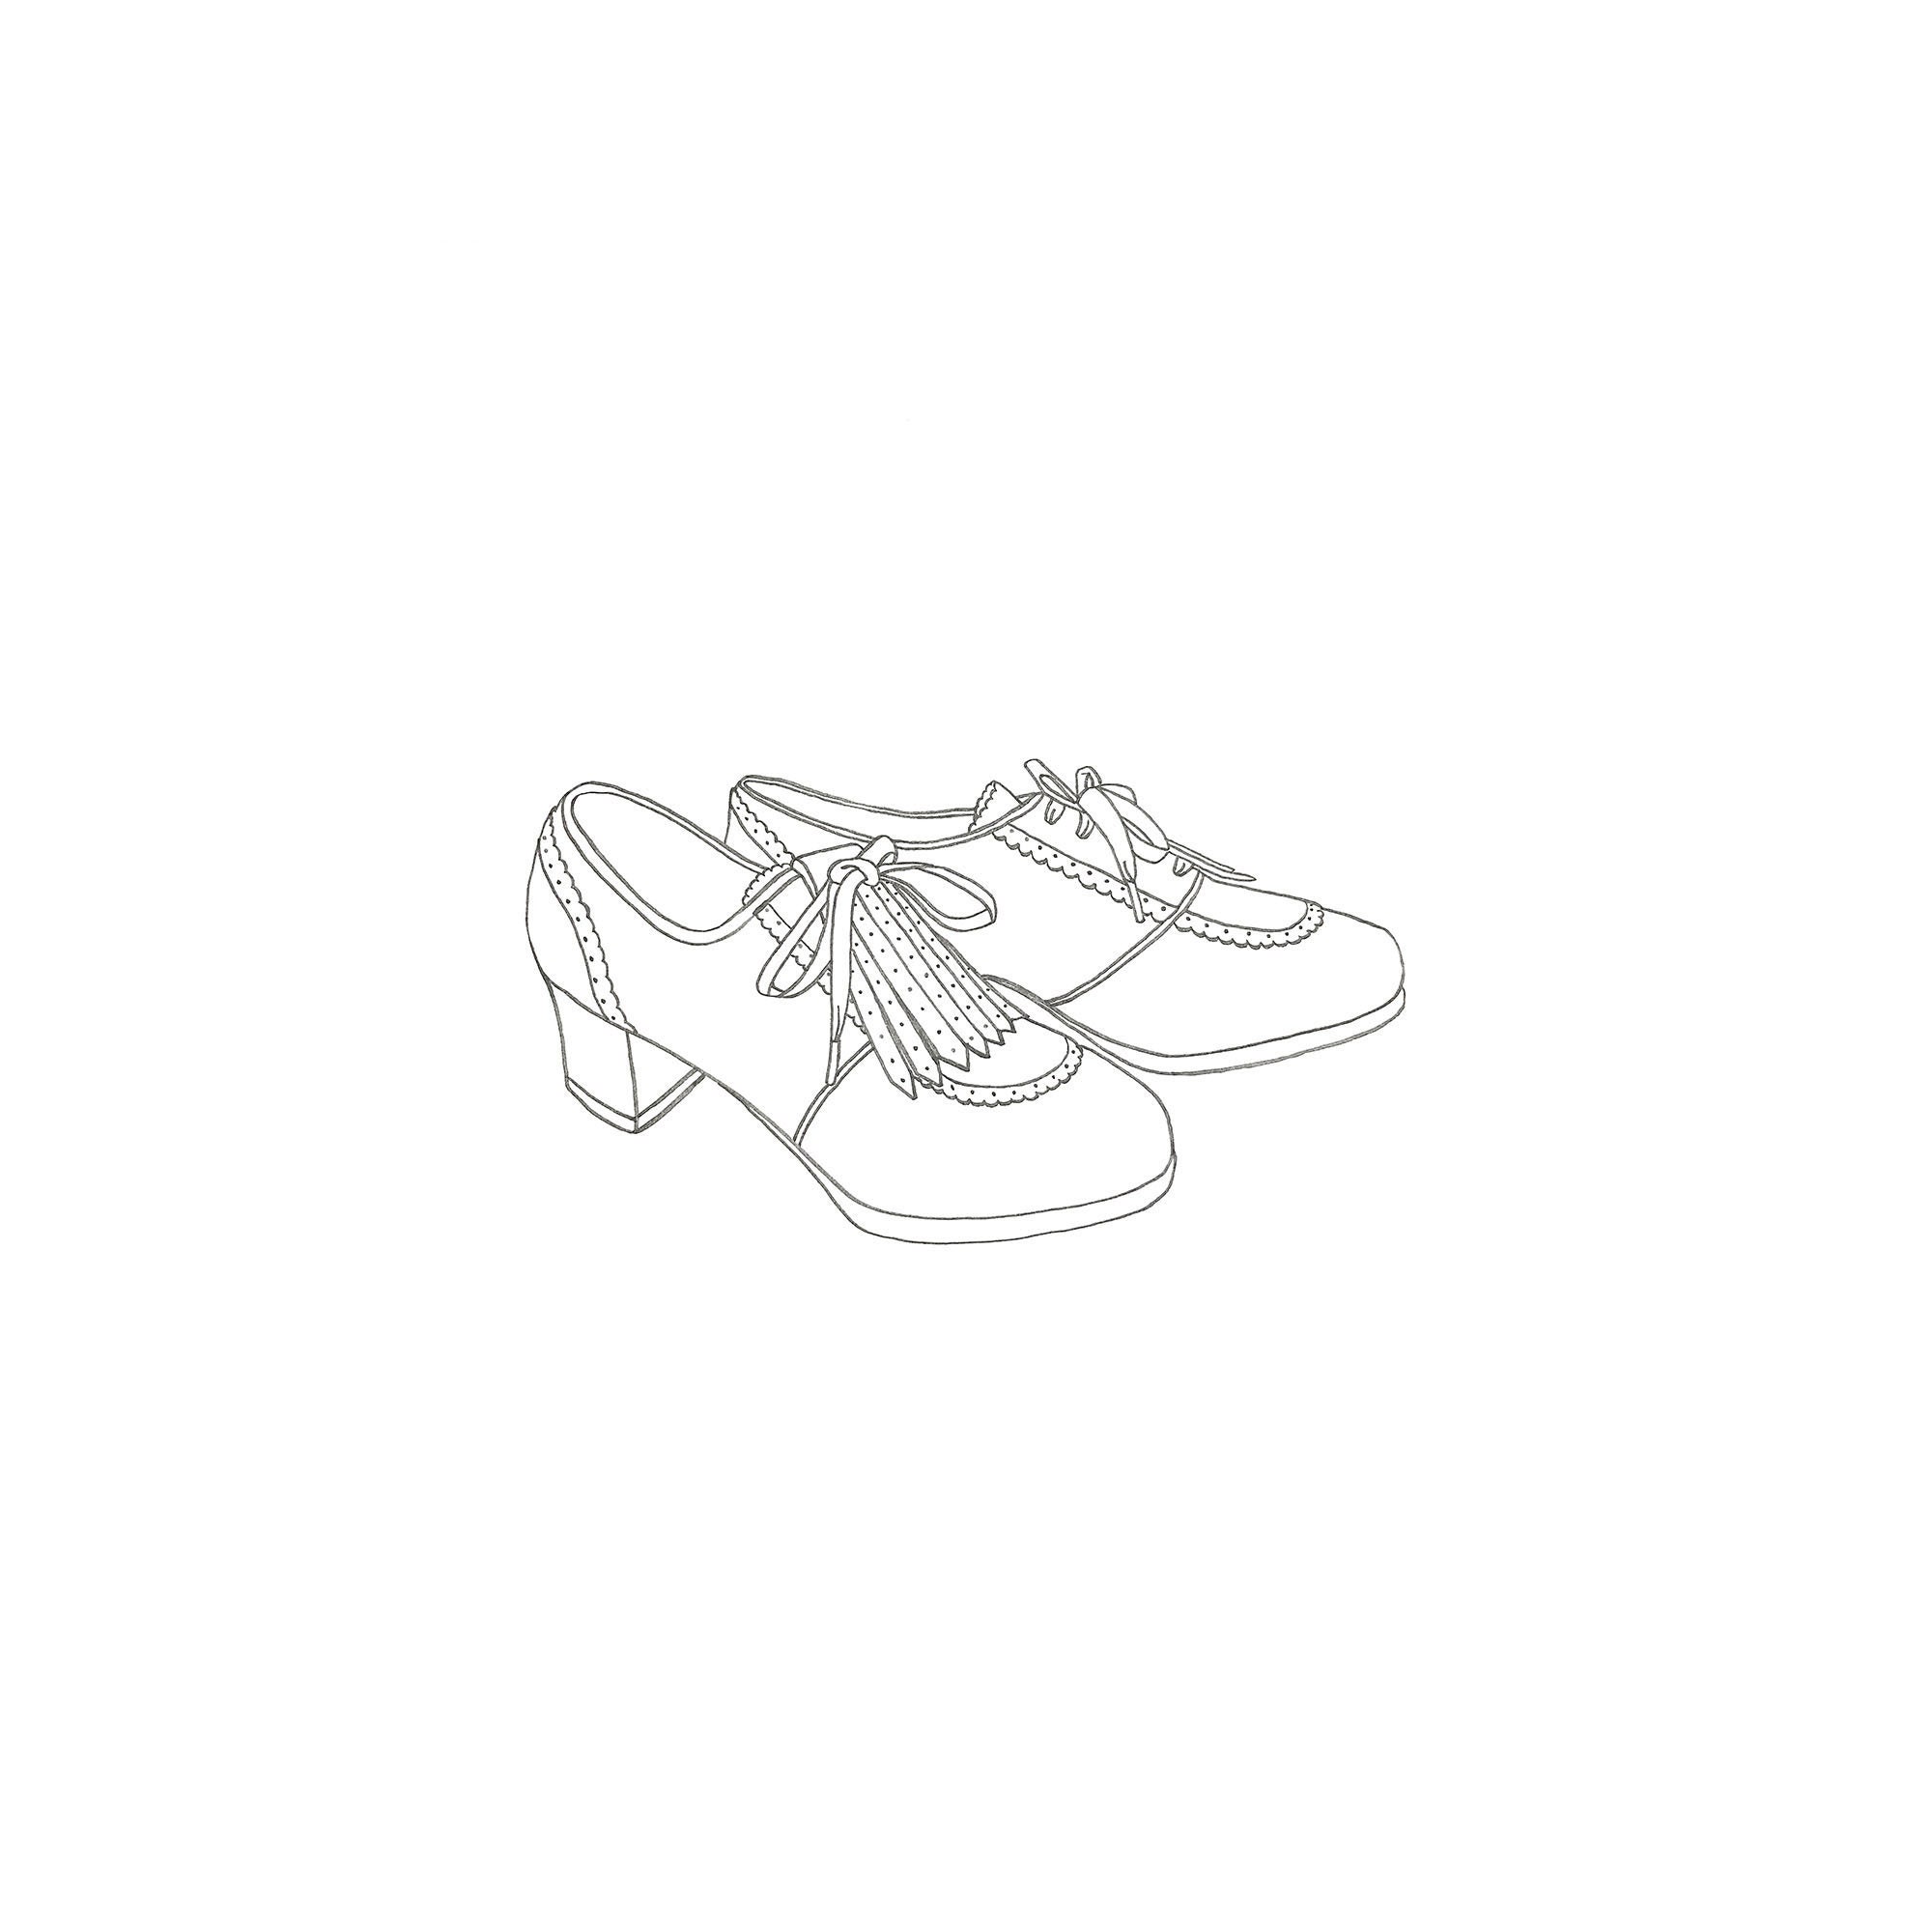 Buy Golf Shoes Shoe Line Drawing Shoe Art Shoes Online in India -